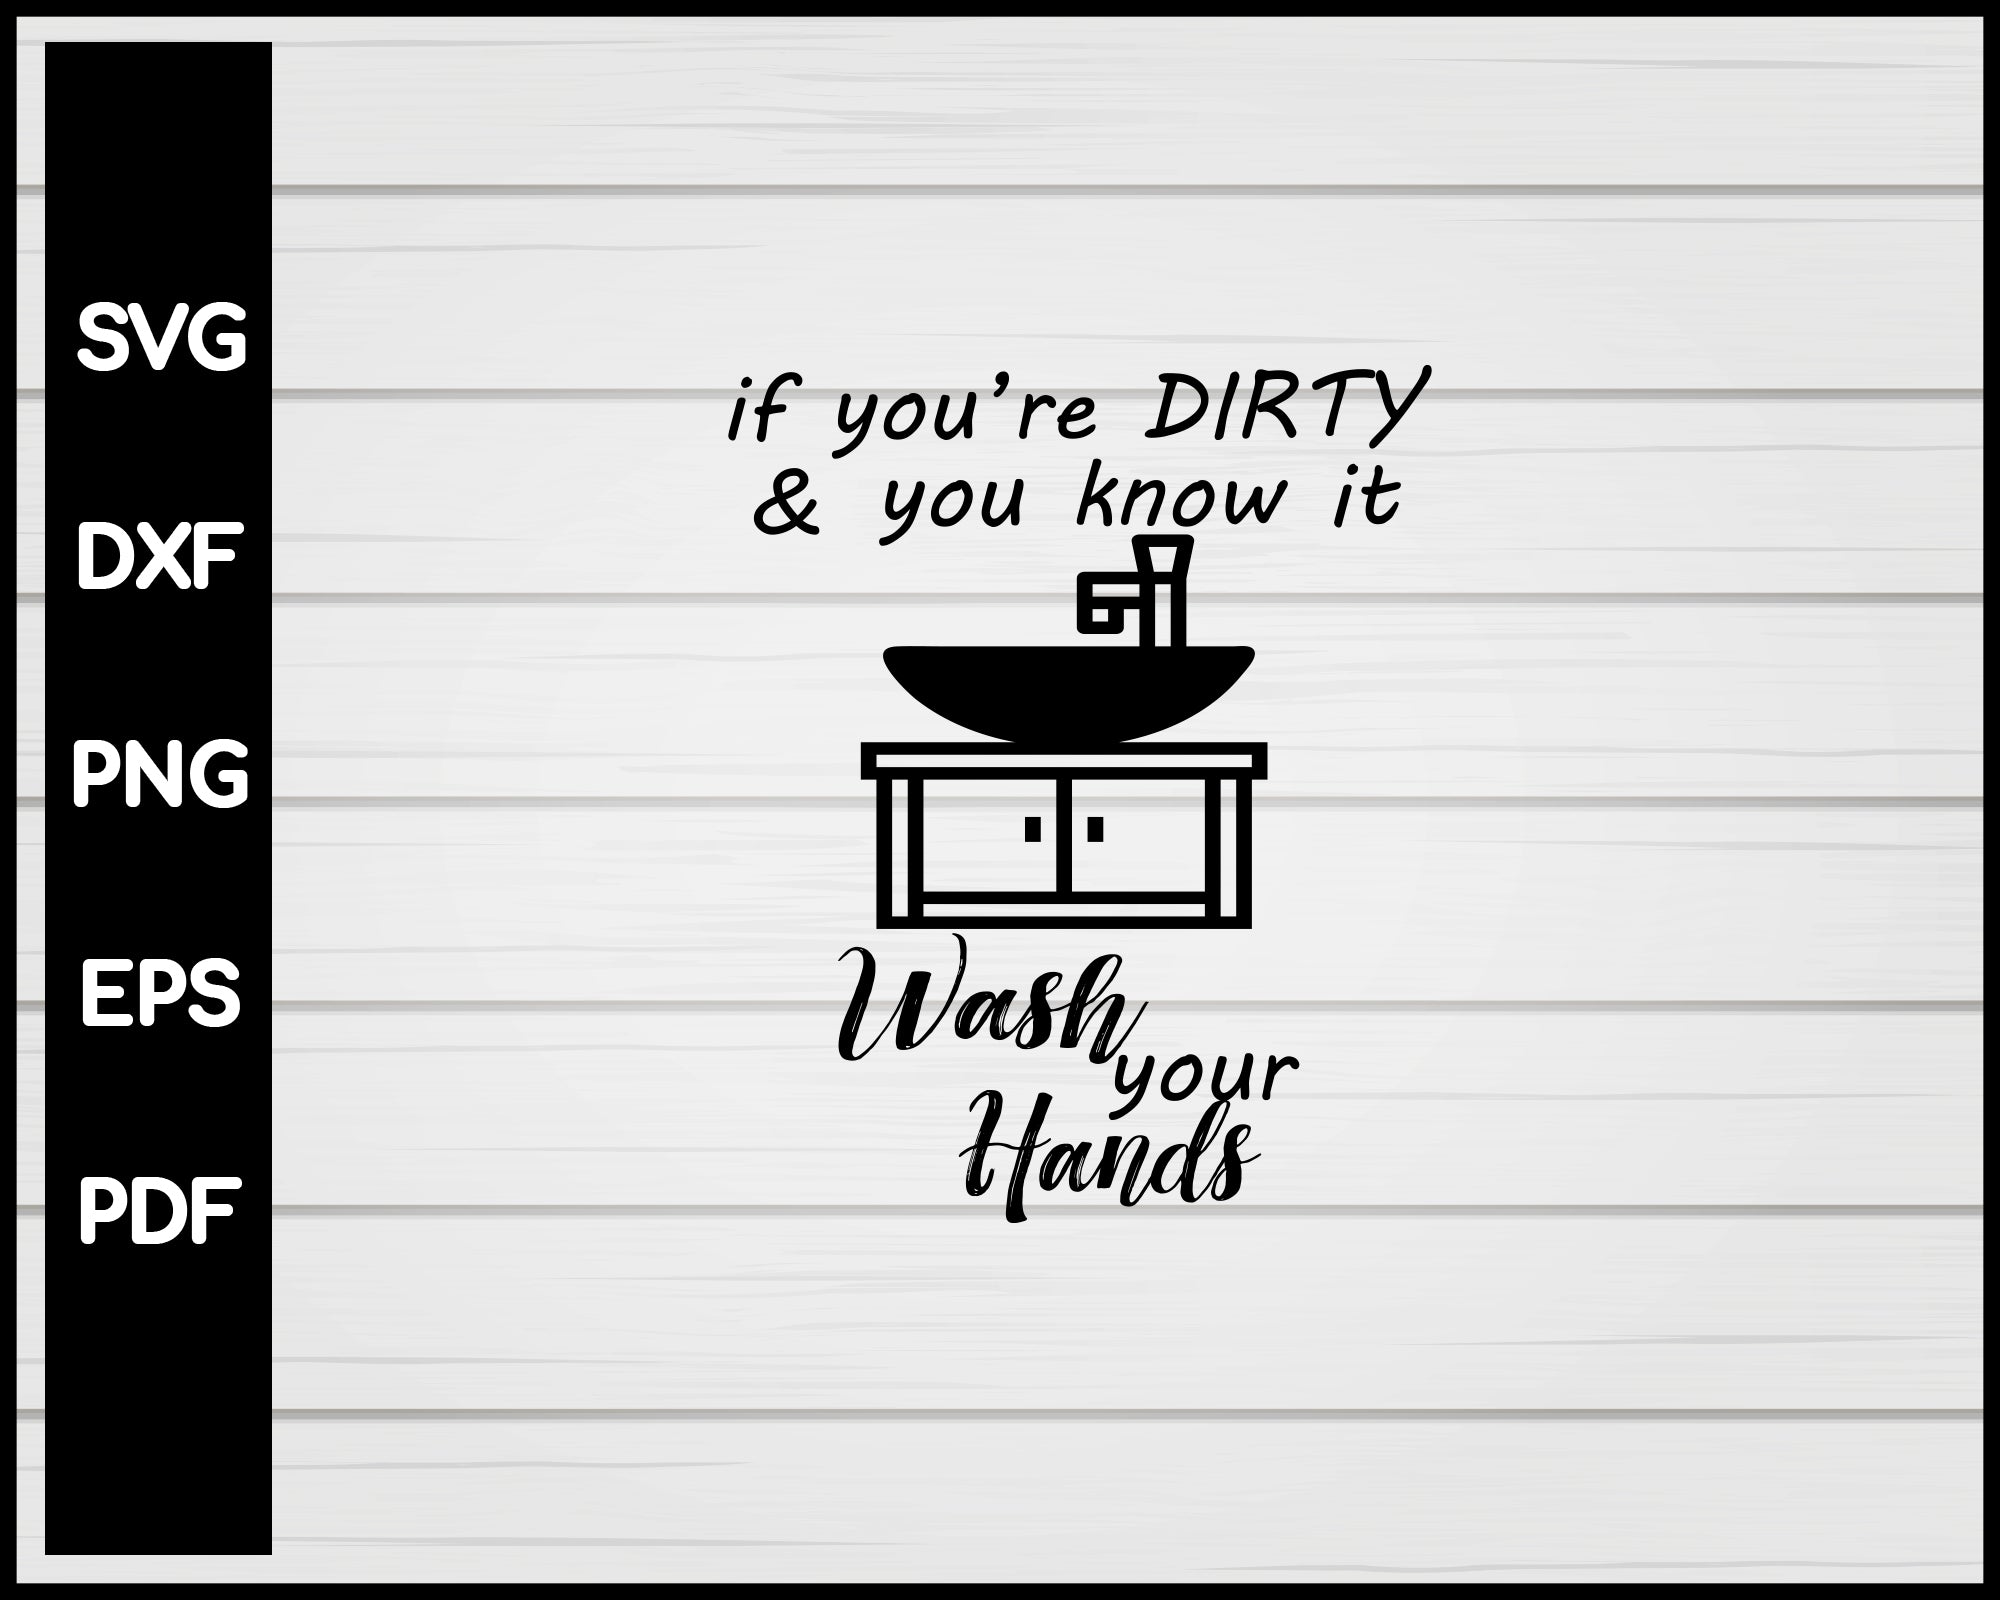 If You're Dirty and You Know It Wash Your Hands svg Cut File For Cricut Silhouette eps png dxf Printable Files